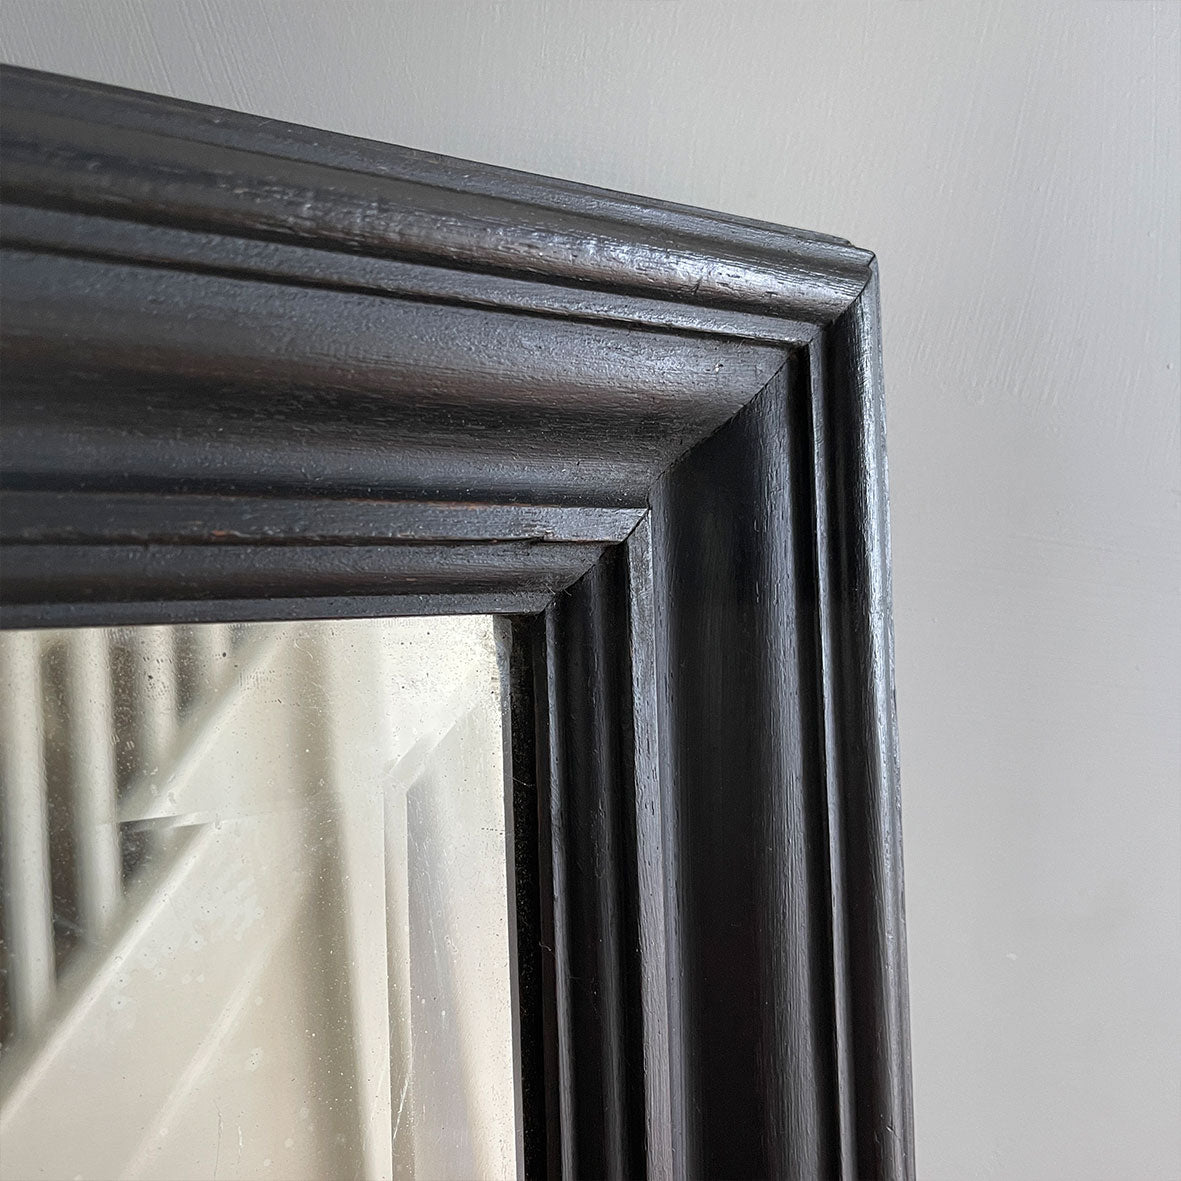 An impressive large Victorian Shop Mirror with beveled glass, a waxed black ebonised wooden frame and original back.  - SHOP NOW - www.intovintage.co.uk